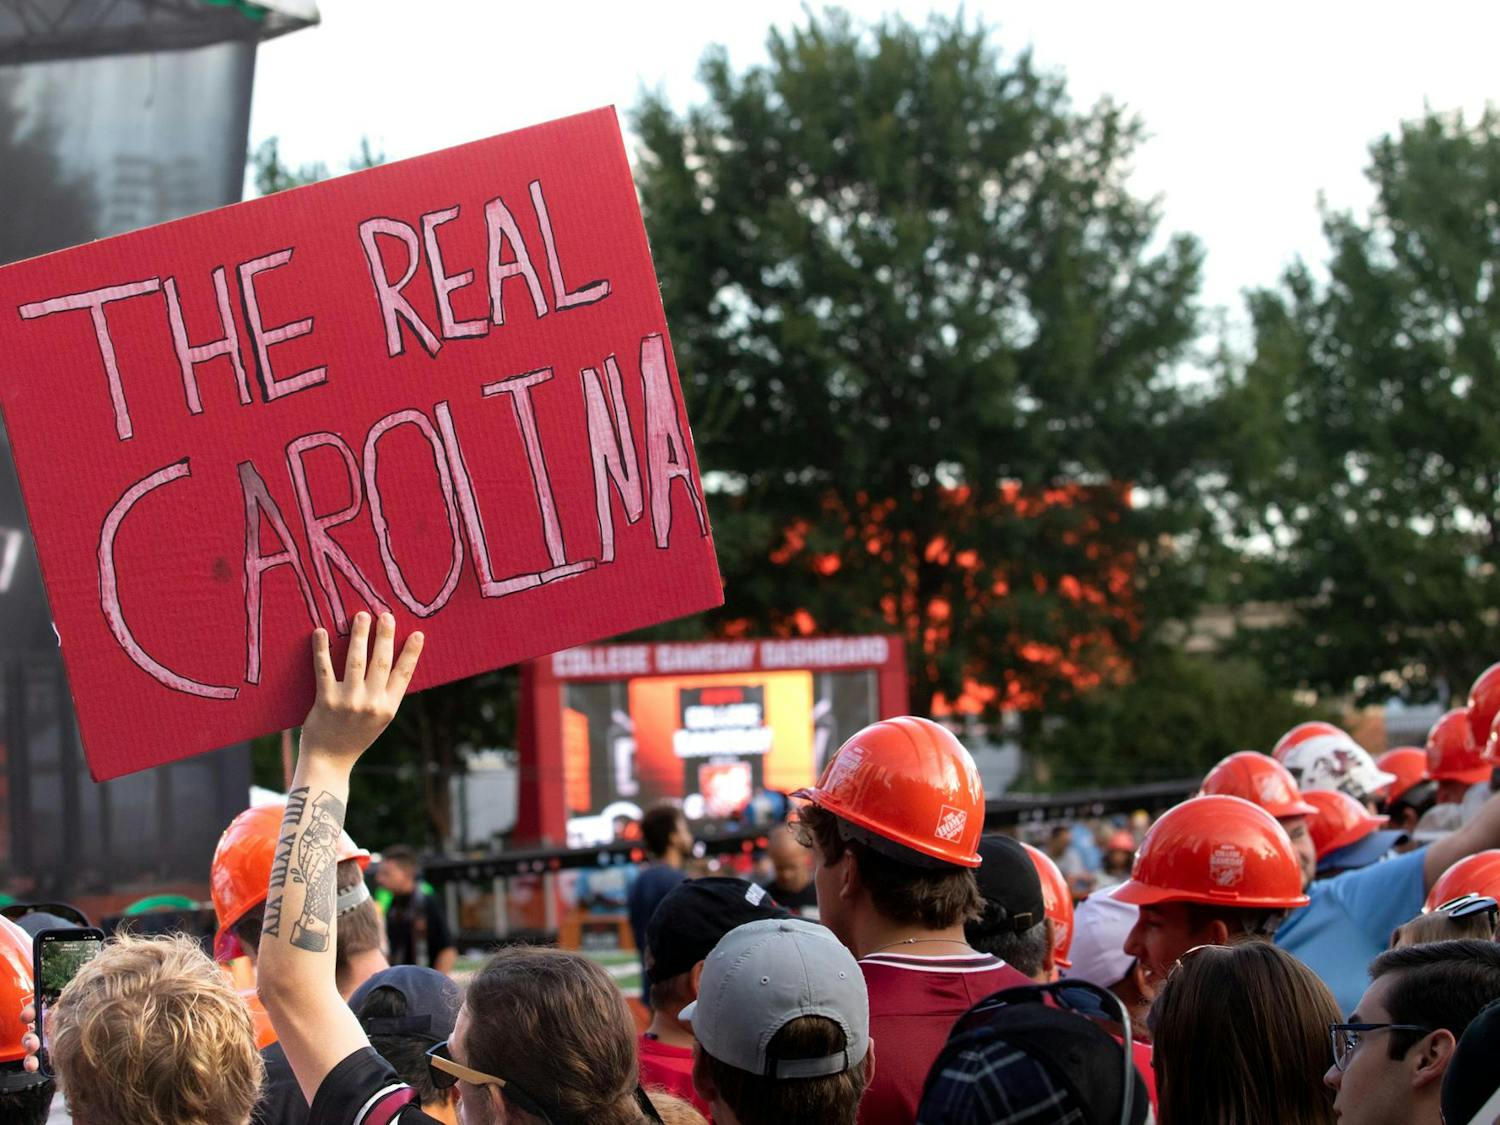 A Gamecocks fan holds up a sign claiming South Carolina is “The real Carolina” during College GameDay. The broadcast in Charlotte leads up to the "Battle of the Carolinas" on Sept. 2, 2023.